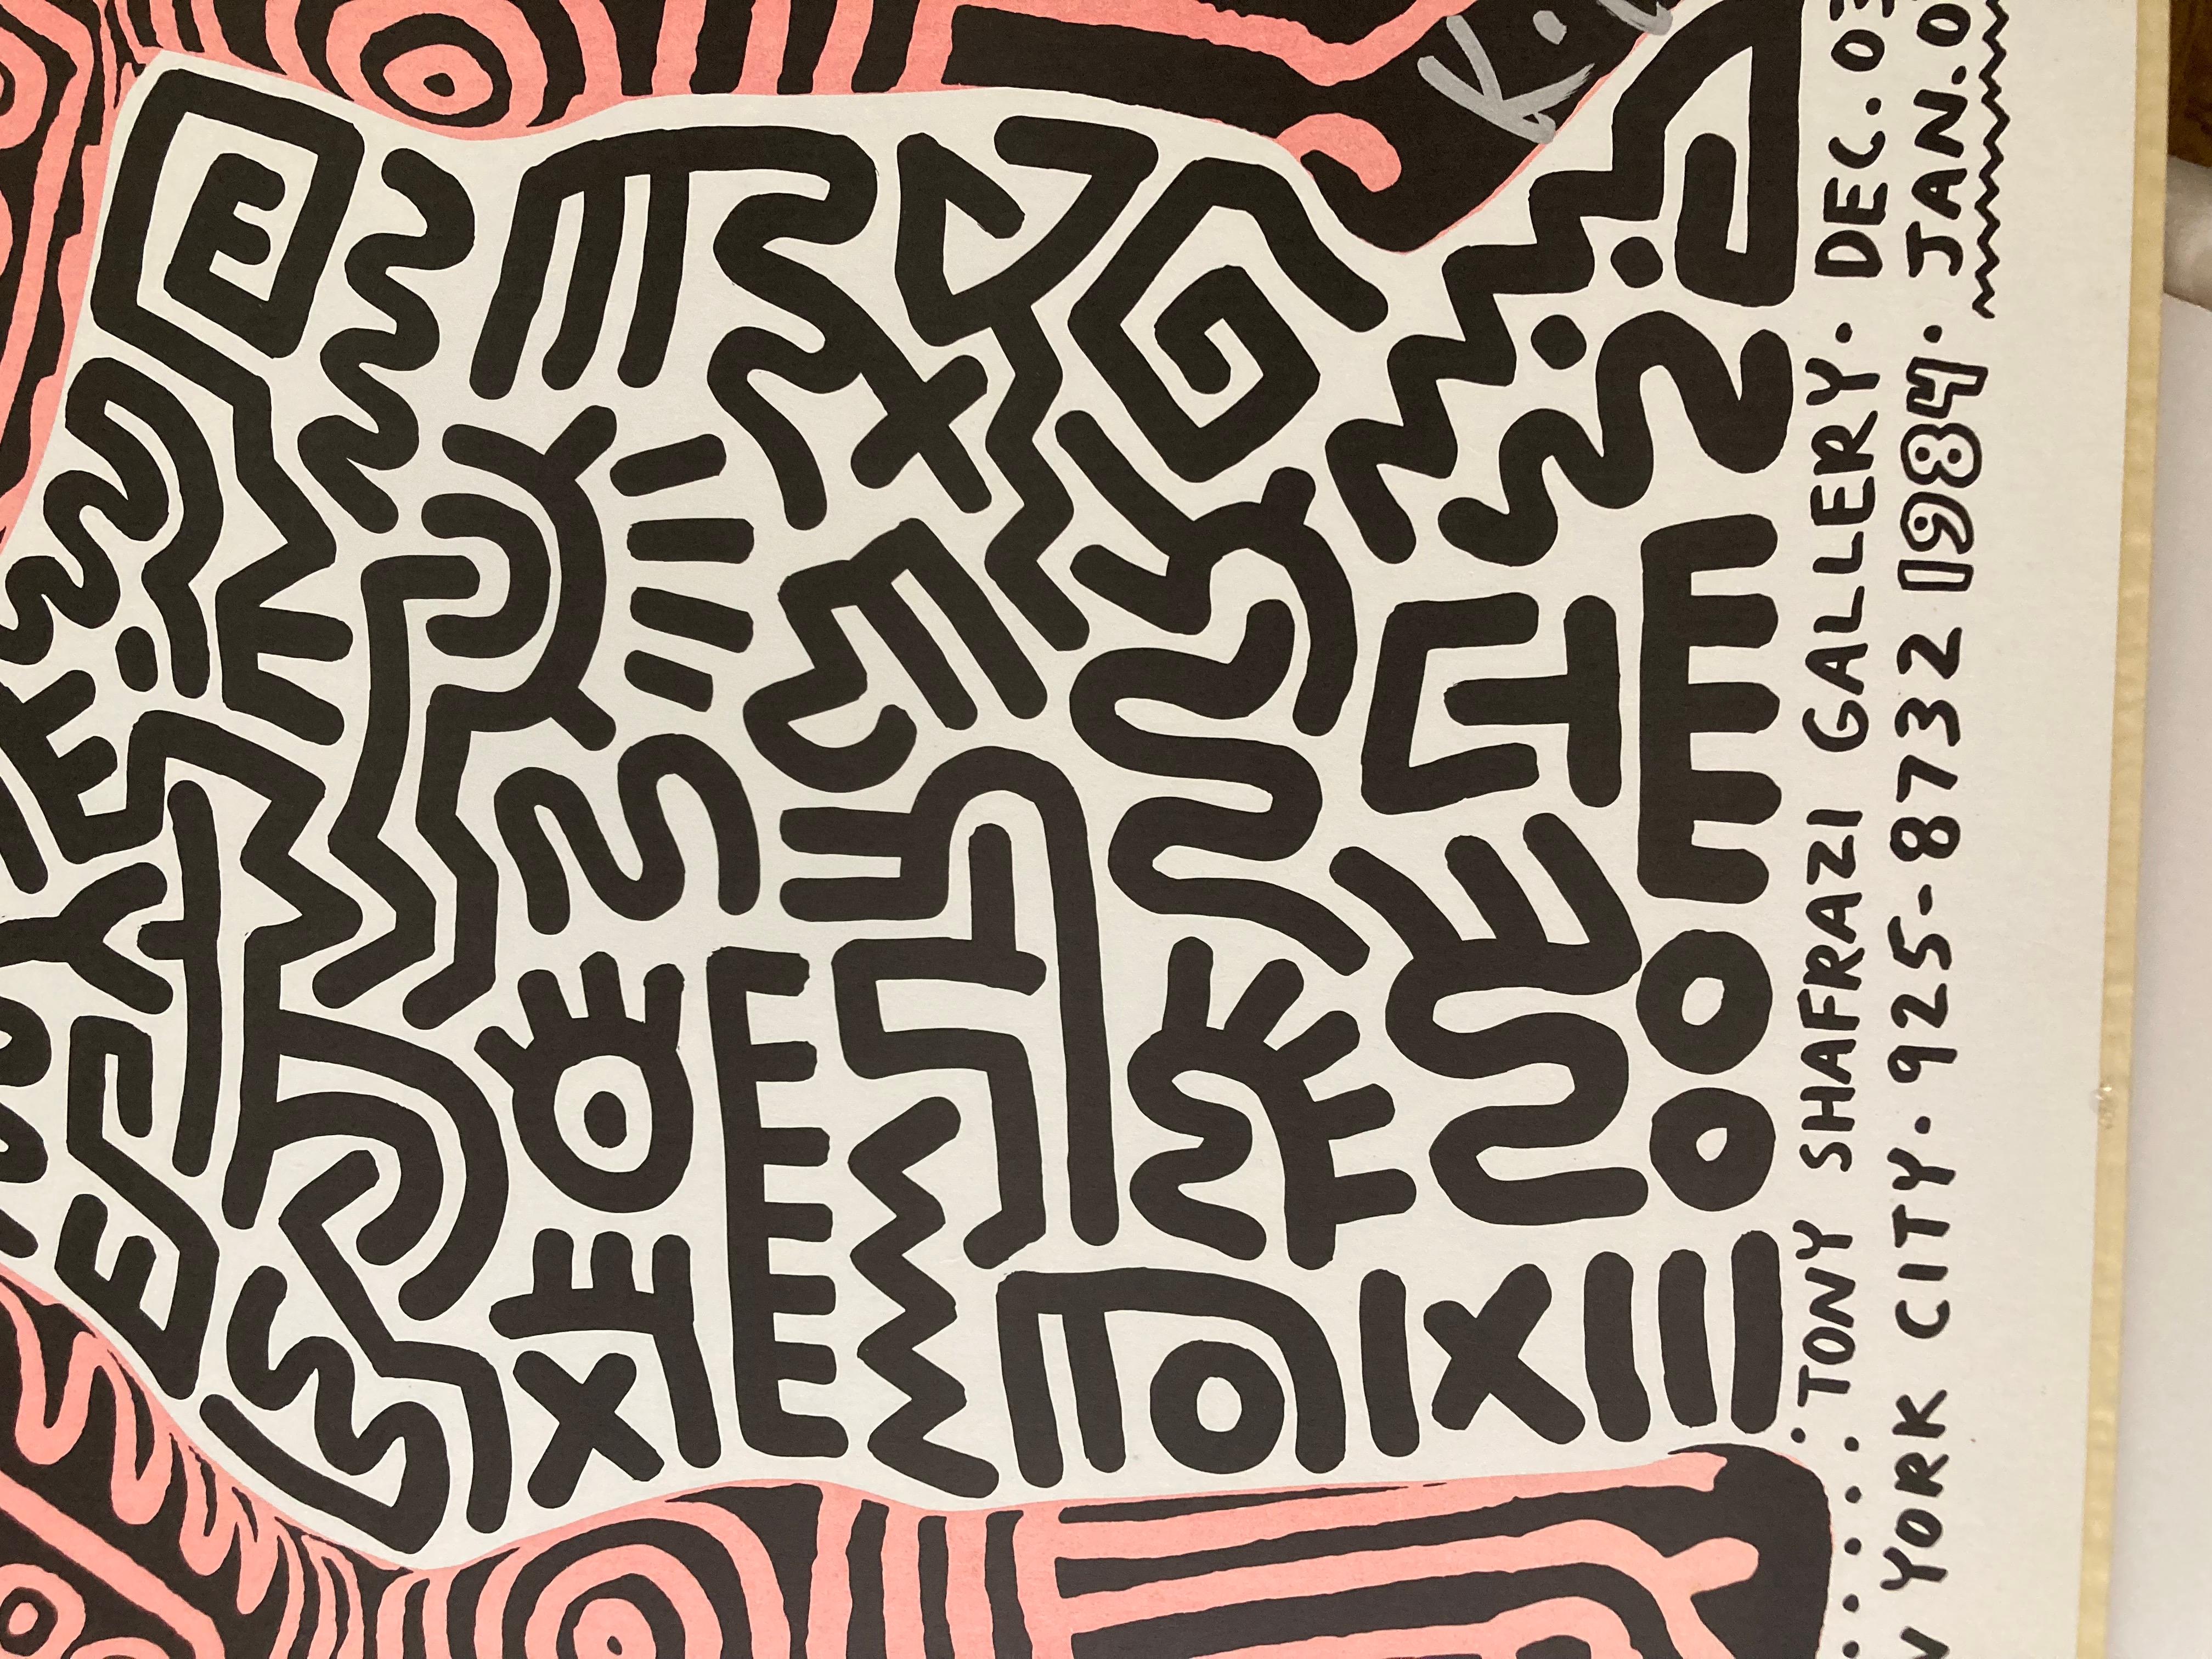 Keith Haring Artist Signed Exhibition Poster 'Into 84' for Tony Shafrazi Gallery For Sale 1